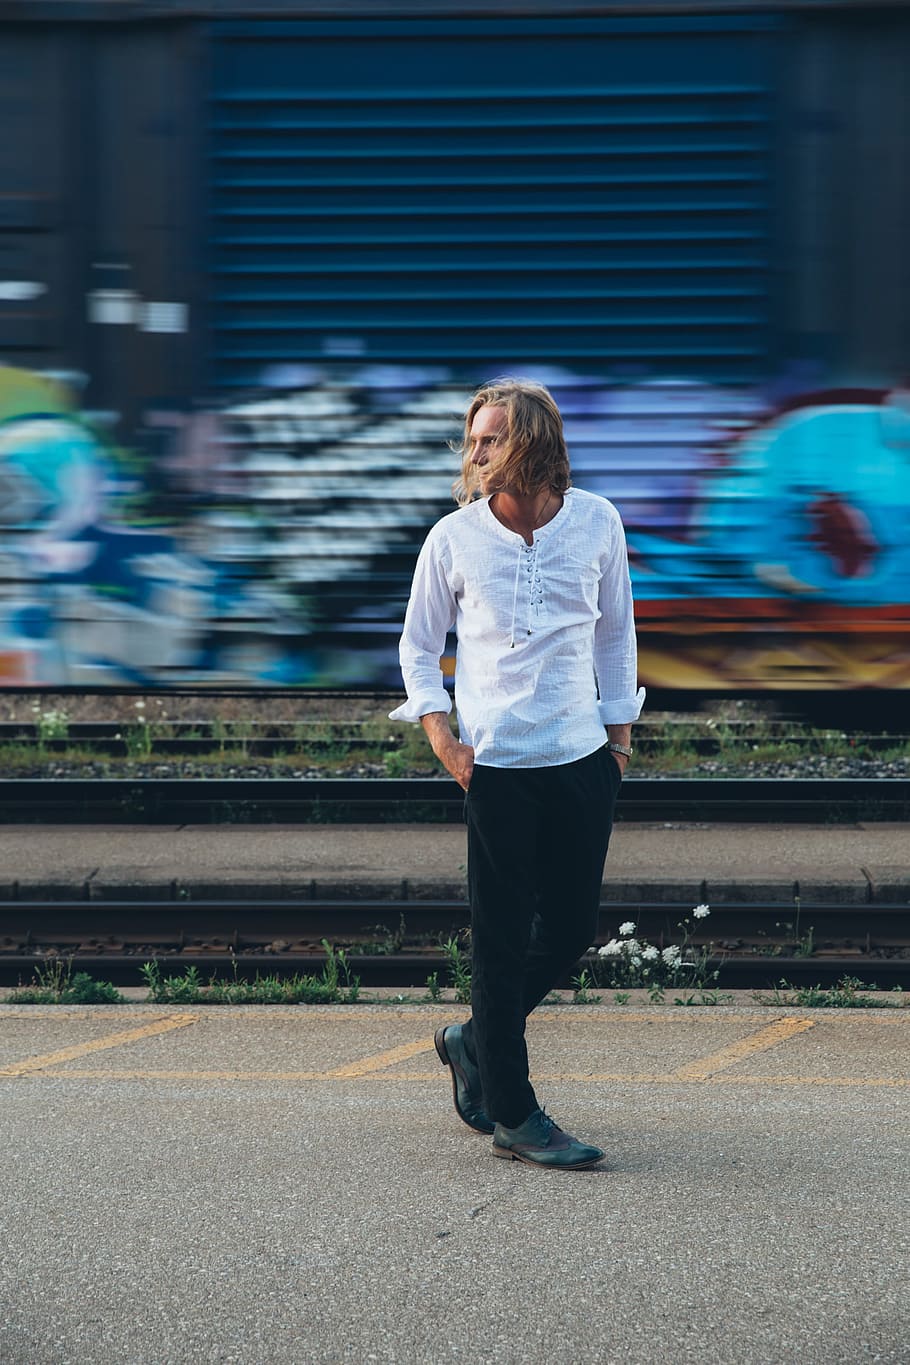 A fashionable man walks by train tracks with graffiti in the background